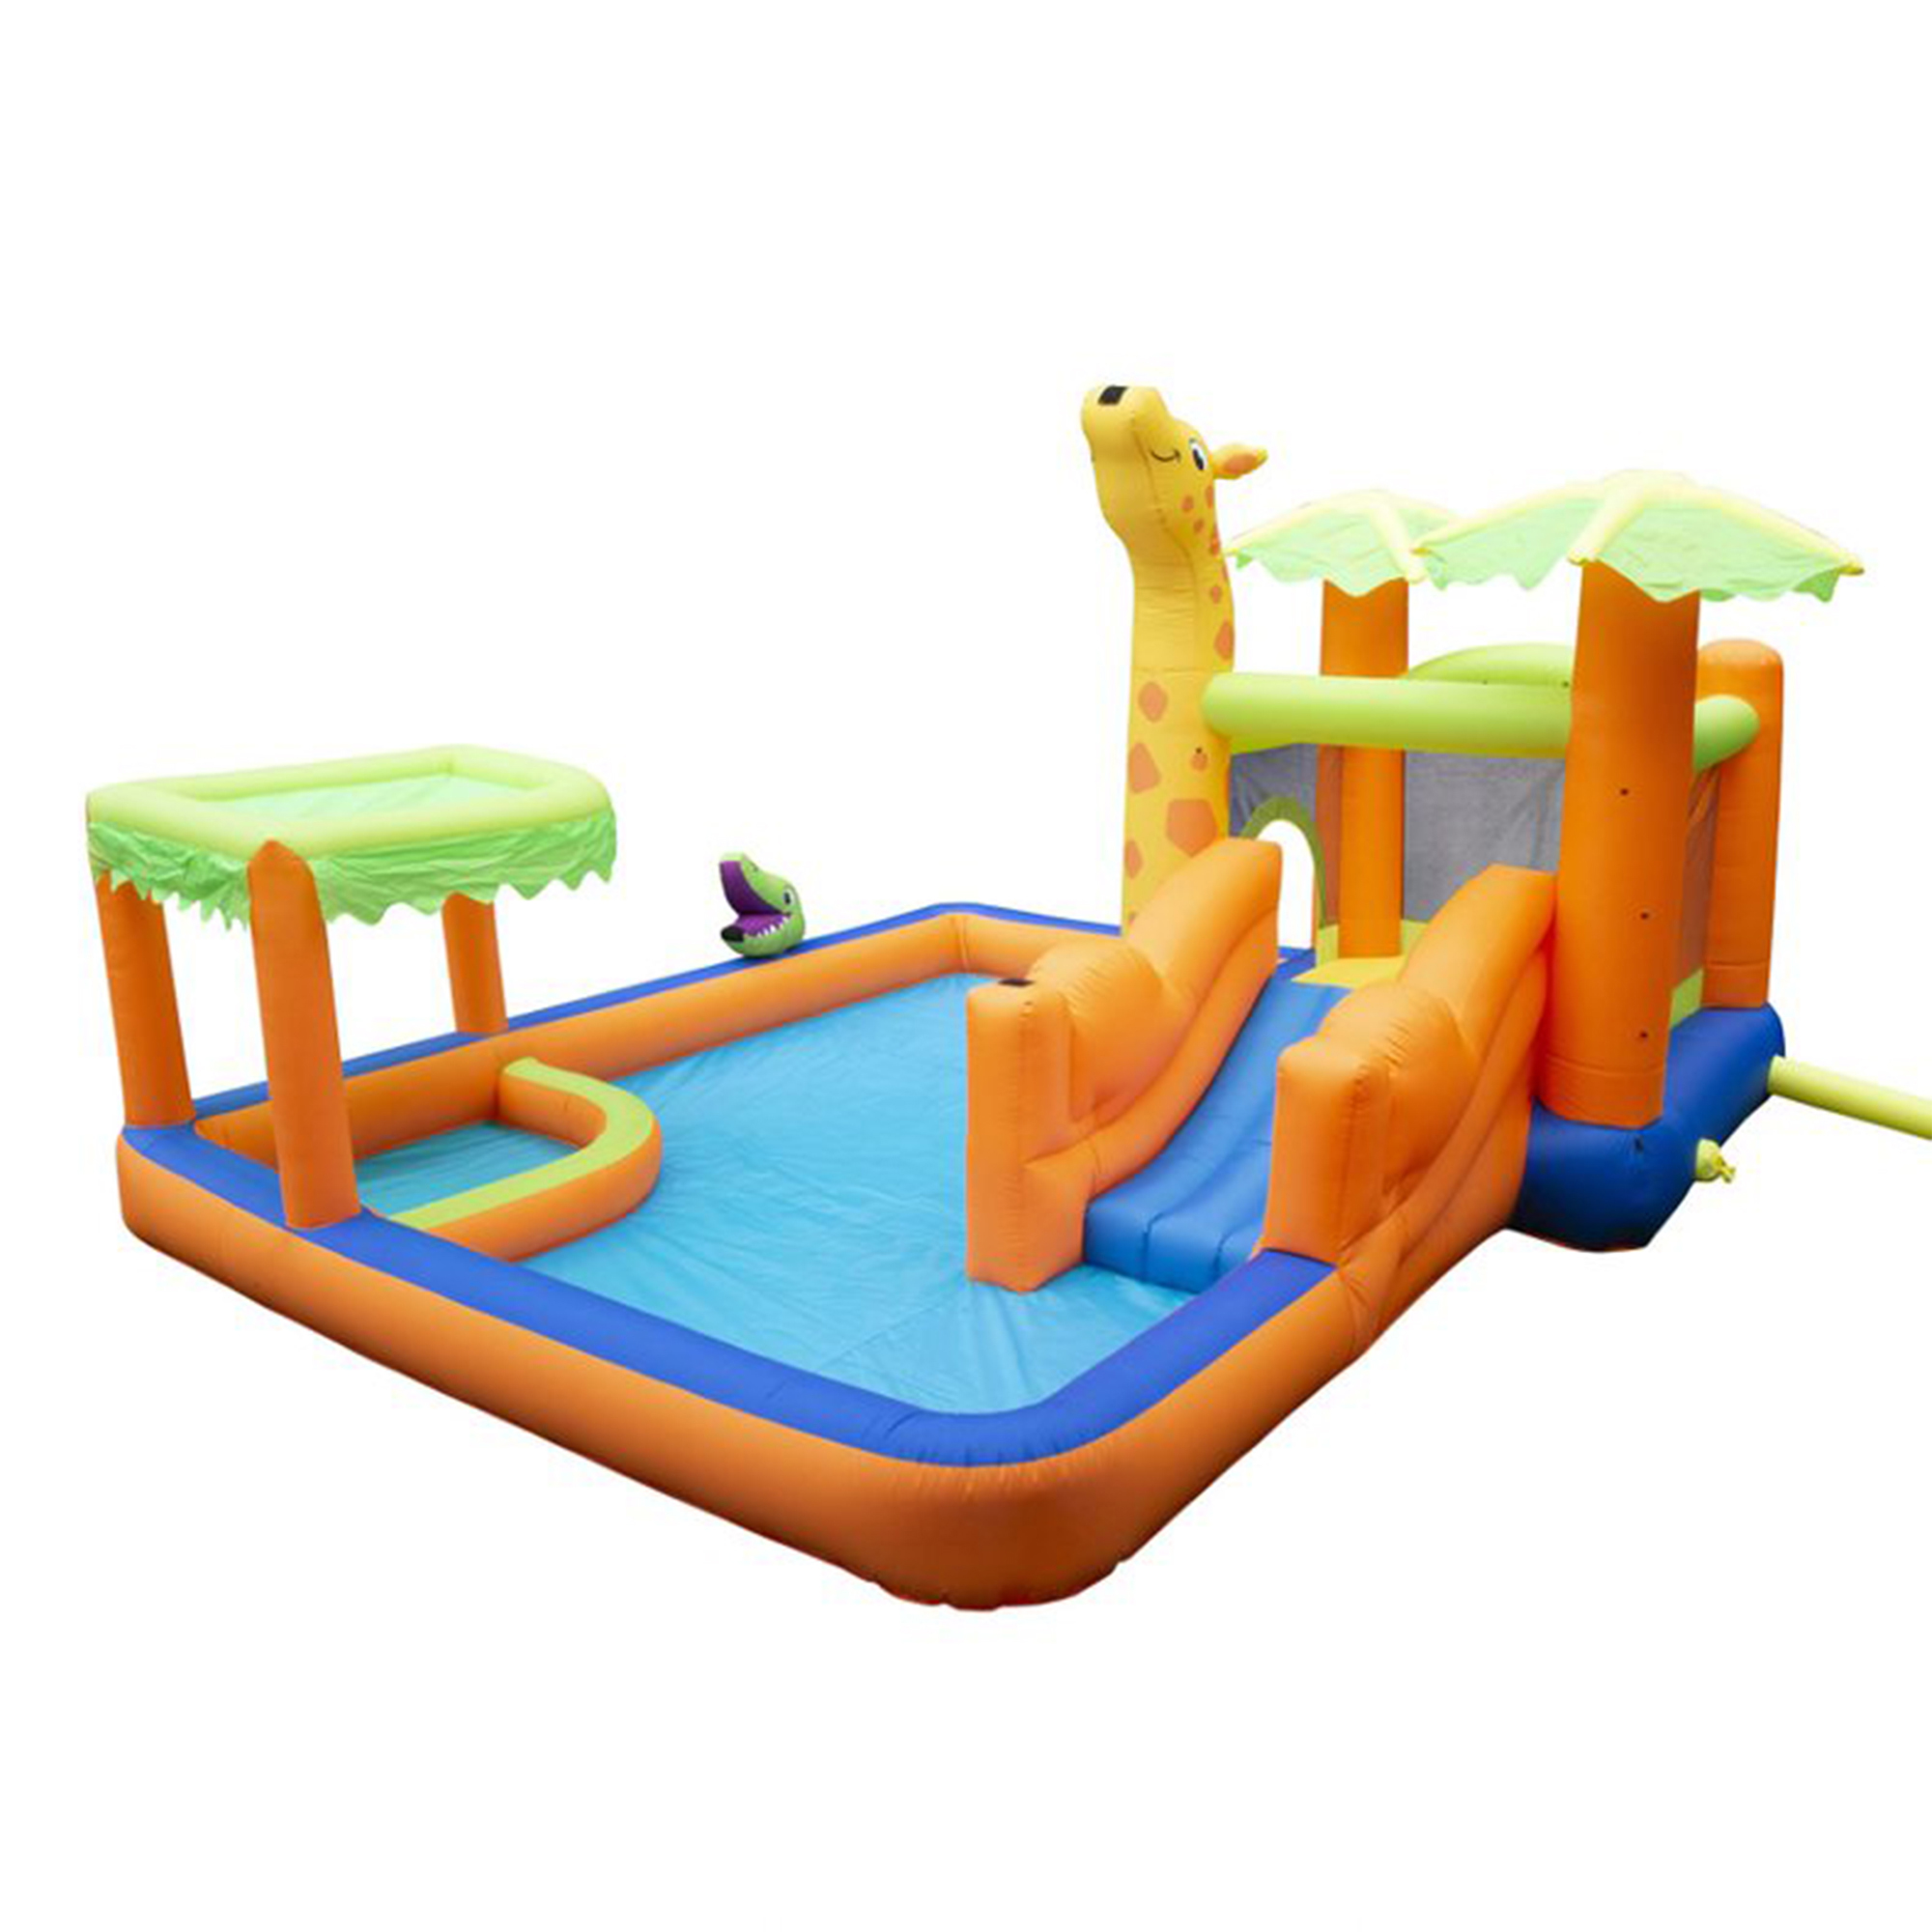 Banzai Safari Splash Water Park Inflatable Bouncer with Cannon and Blower - image 7 of 12